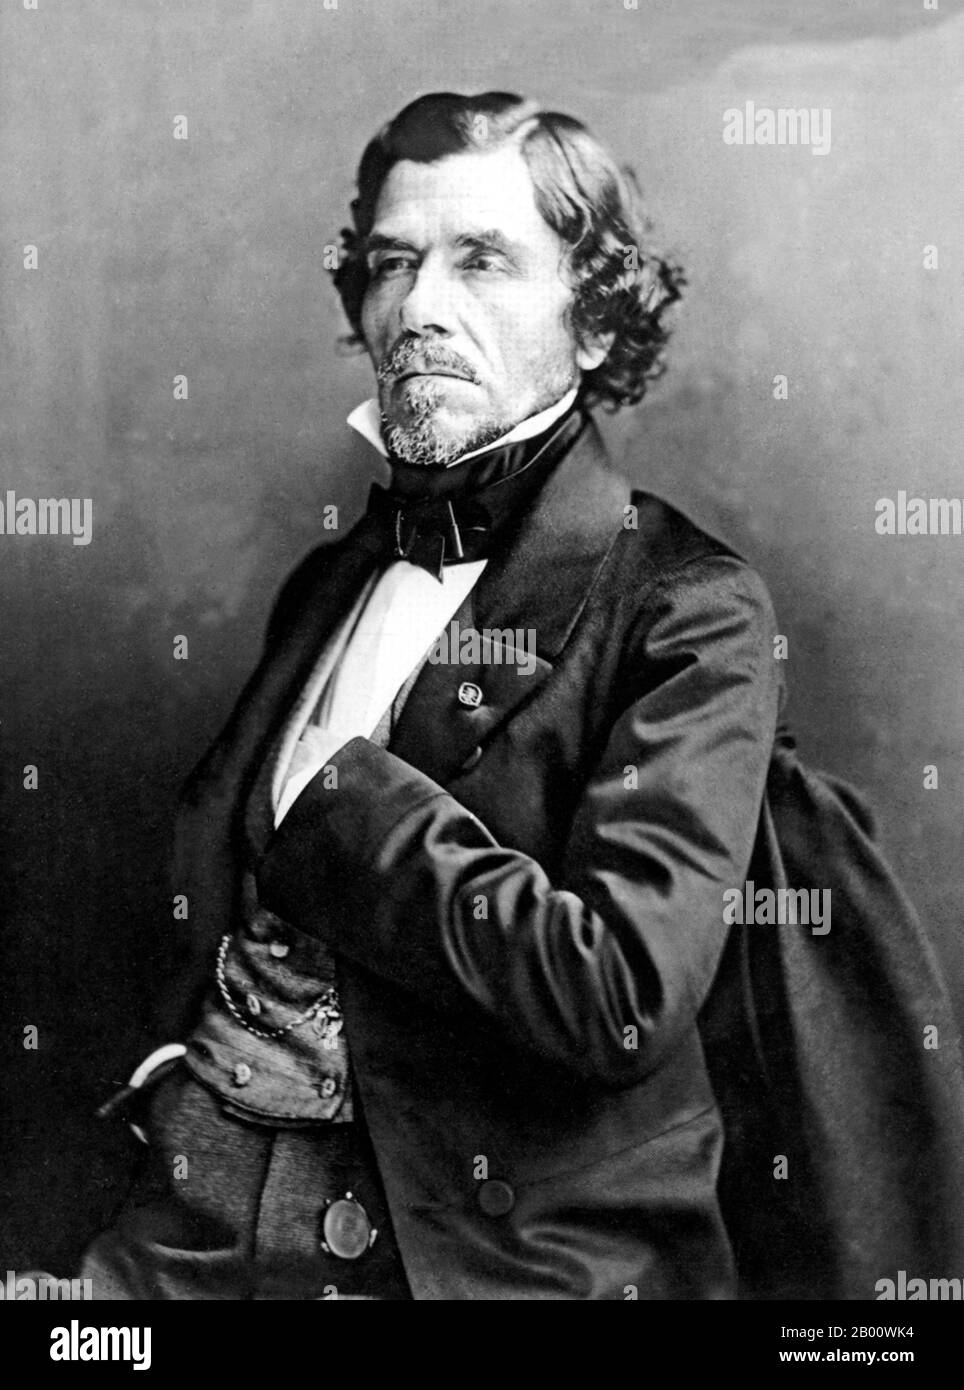 France:  Eugène Delacroix (1798 – 1863), photographed by Félix Nadar (1820-1910), 1858.  Ferdinand Victor Eugène Delacroix (26 April 1798 – 13 August 1863) was a French Romantic artist regarded from the outset of his career as the leader of the French Romantic school. Delacroix's use of expressive brushstrokes and his study of the optical effects of colour profoundly shaped the work of the Impressionists, while his passion for the exotic inspired the artists of the Symbolist movement. Stock Photo